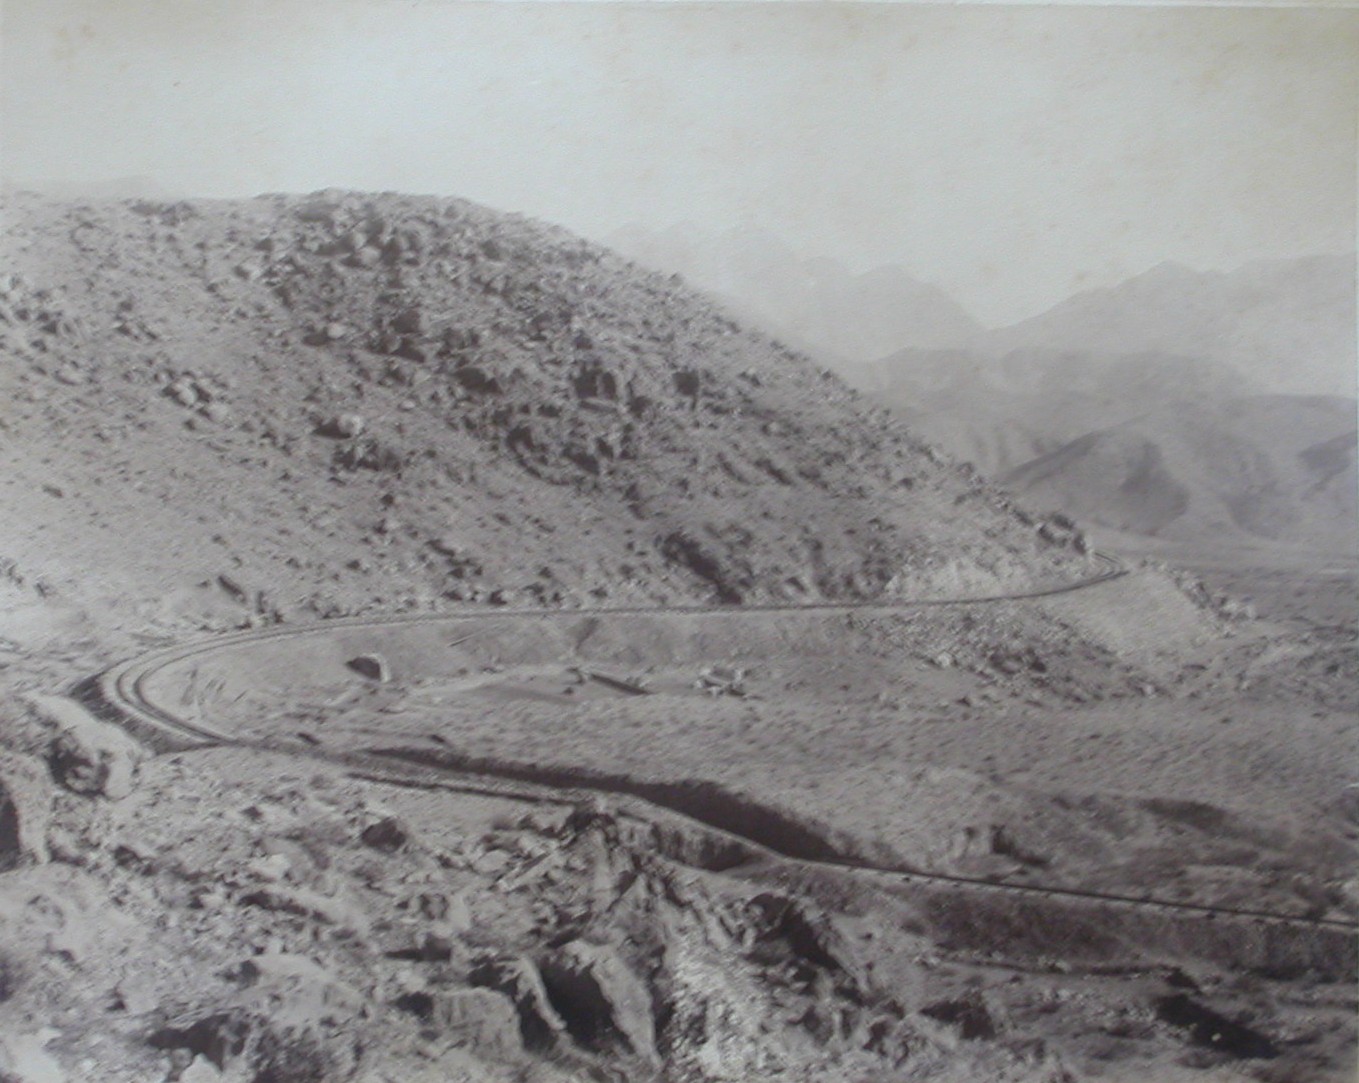 View of Bolan Pass railway line, 1890. Photo by William Edge.